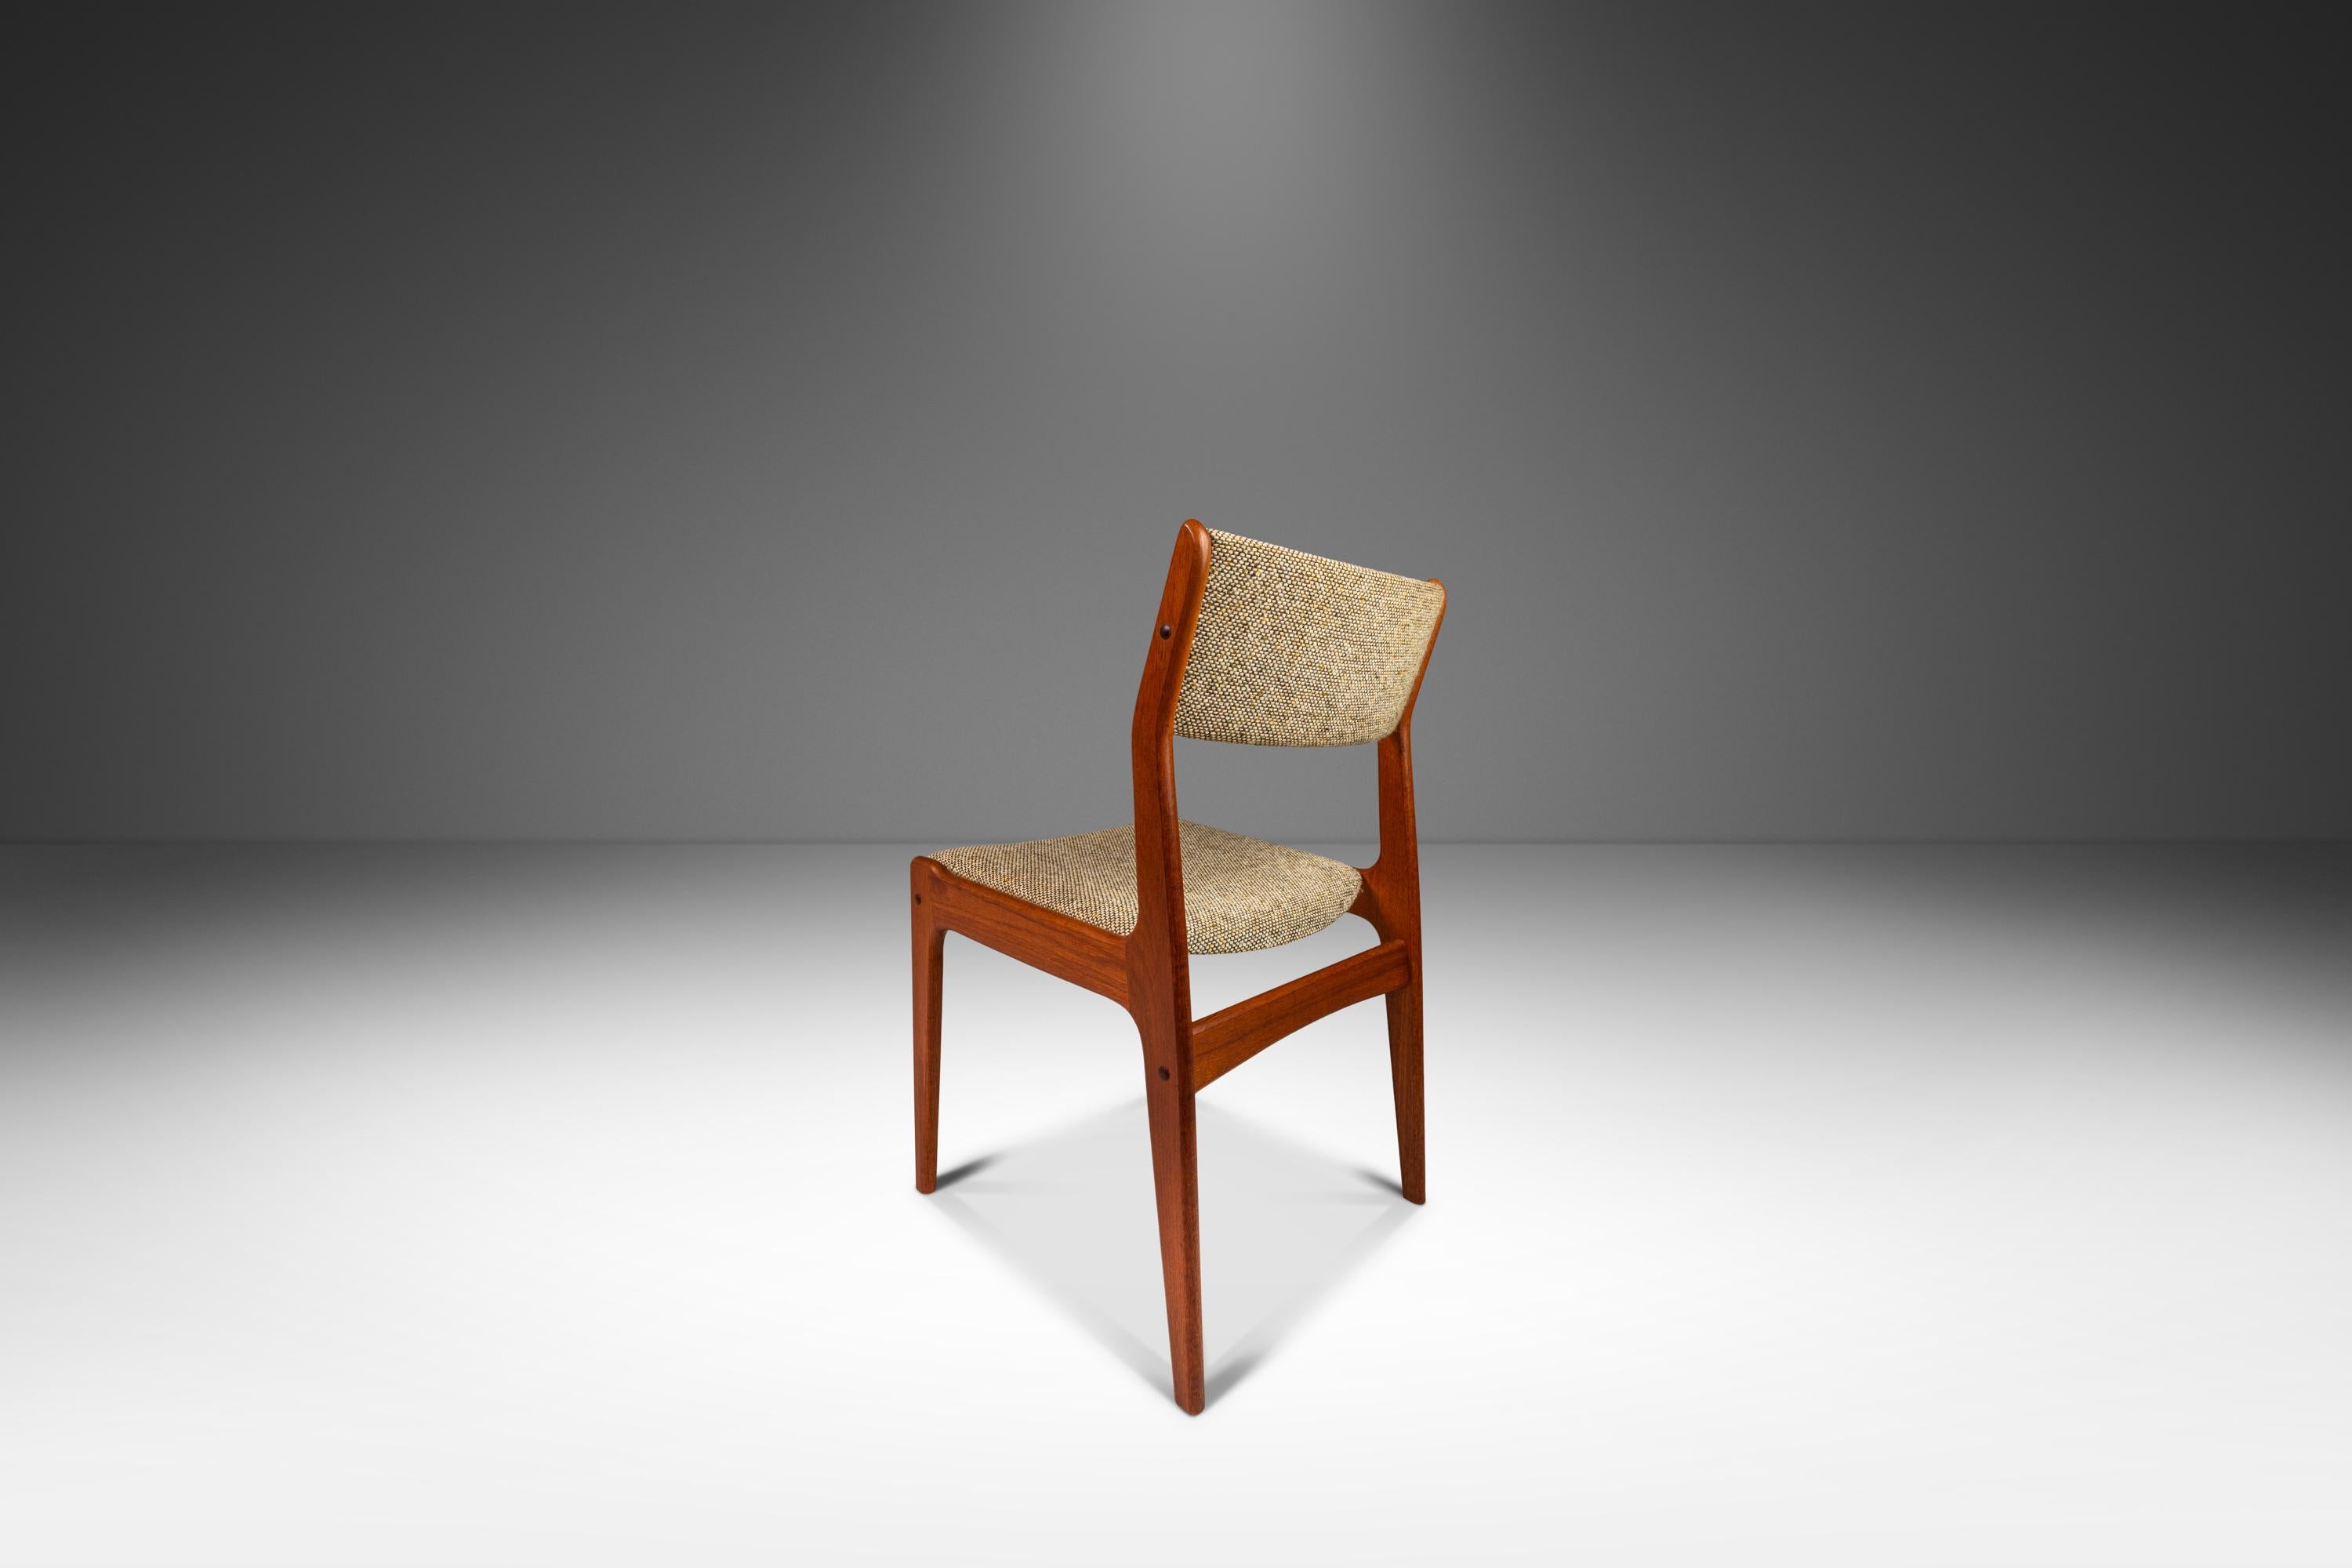 Singaporean Set of 4 Danish Teak Dining Chairs by D-SCAN, Original Fabric, c. 1970s For Sale